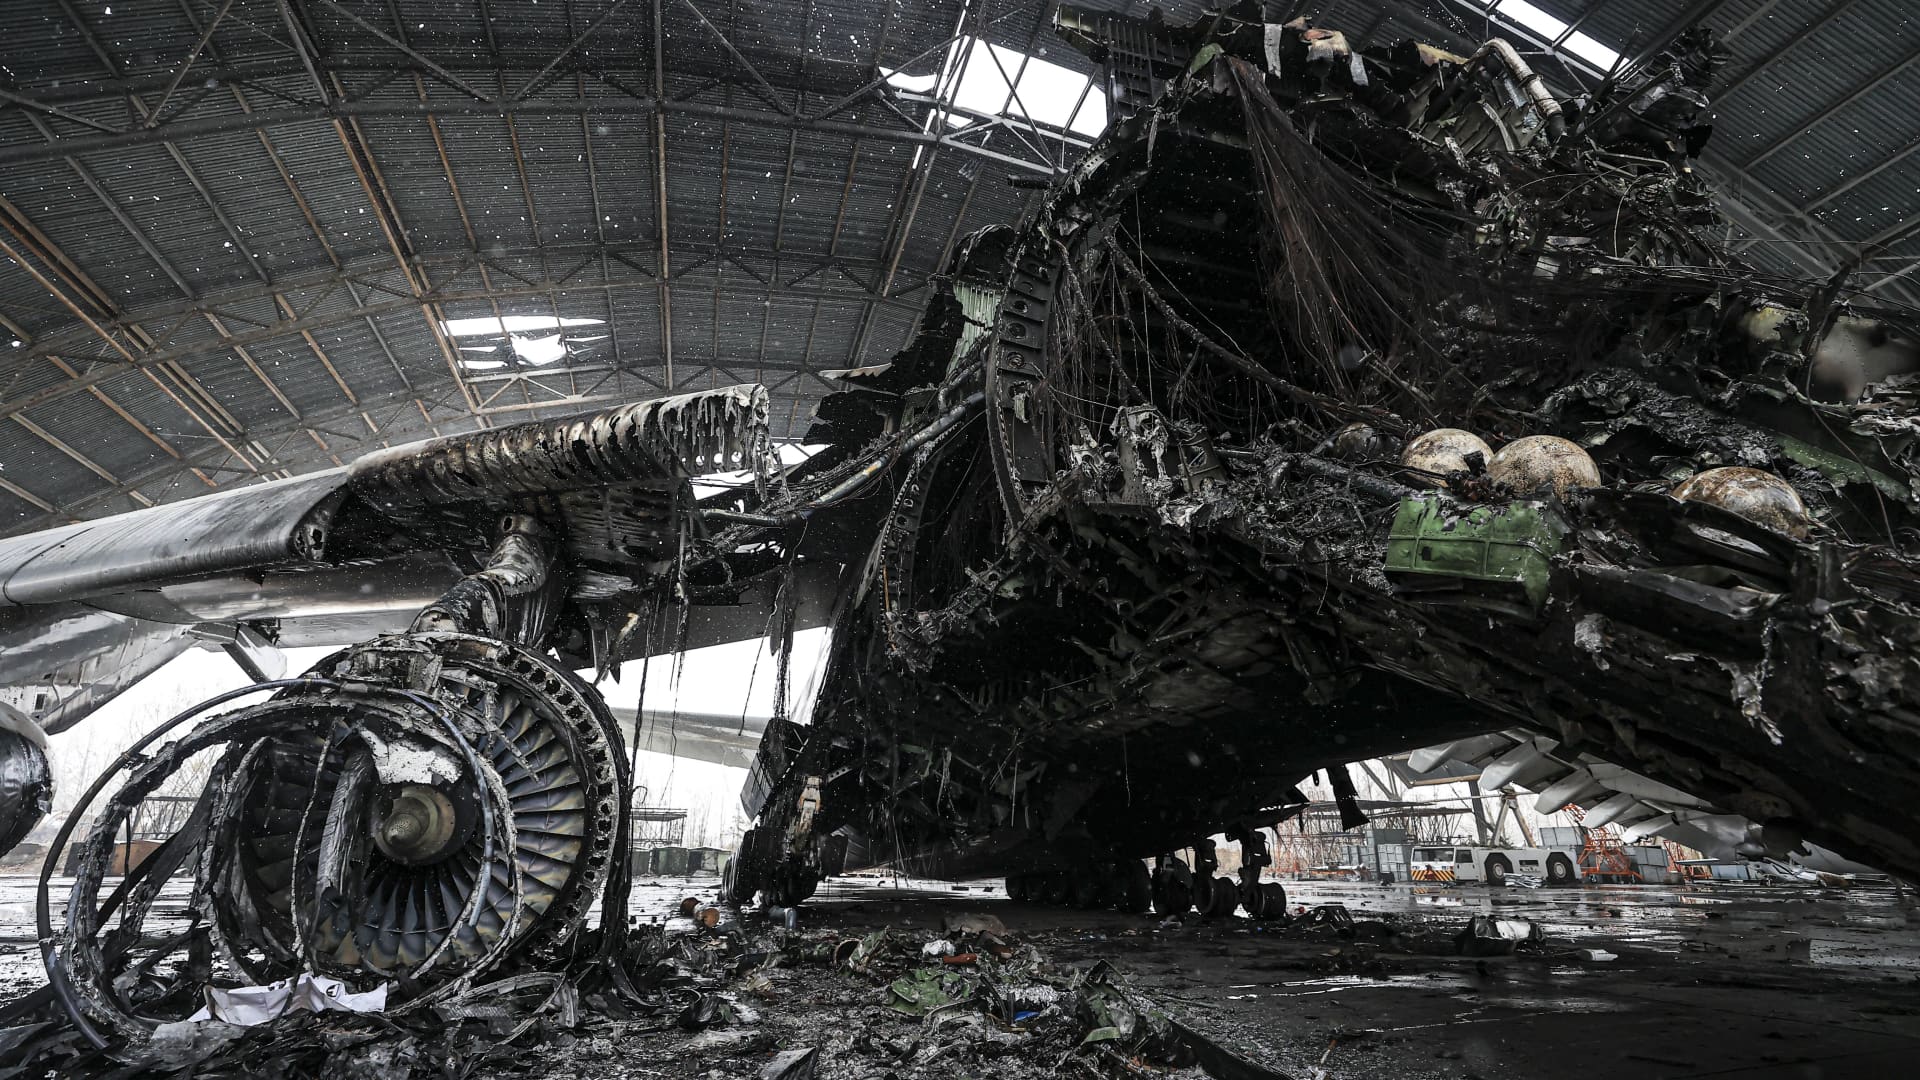 A view of the wreckage of Antonov An-225 Mriya cargo plane, the world's biggest aircraft, destroyed by Russian shelling as Russia's attack on Ukraine continues, at an airshed in Hostomel, Ukraine on April 03, 2022. 